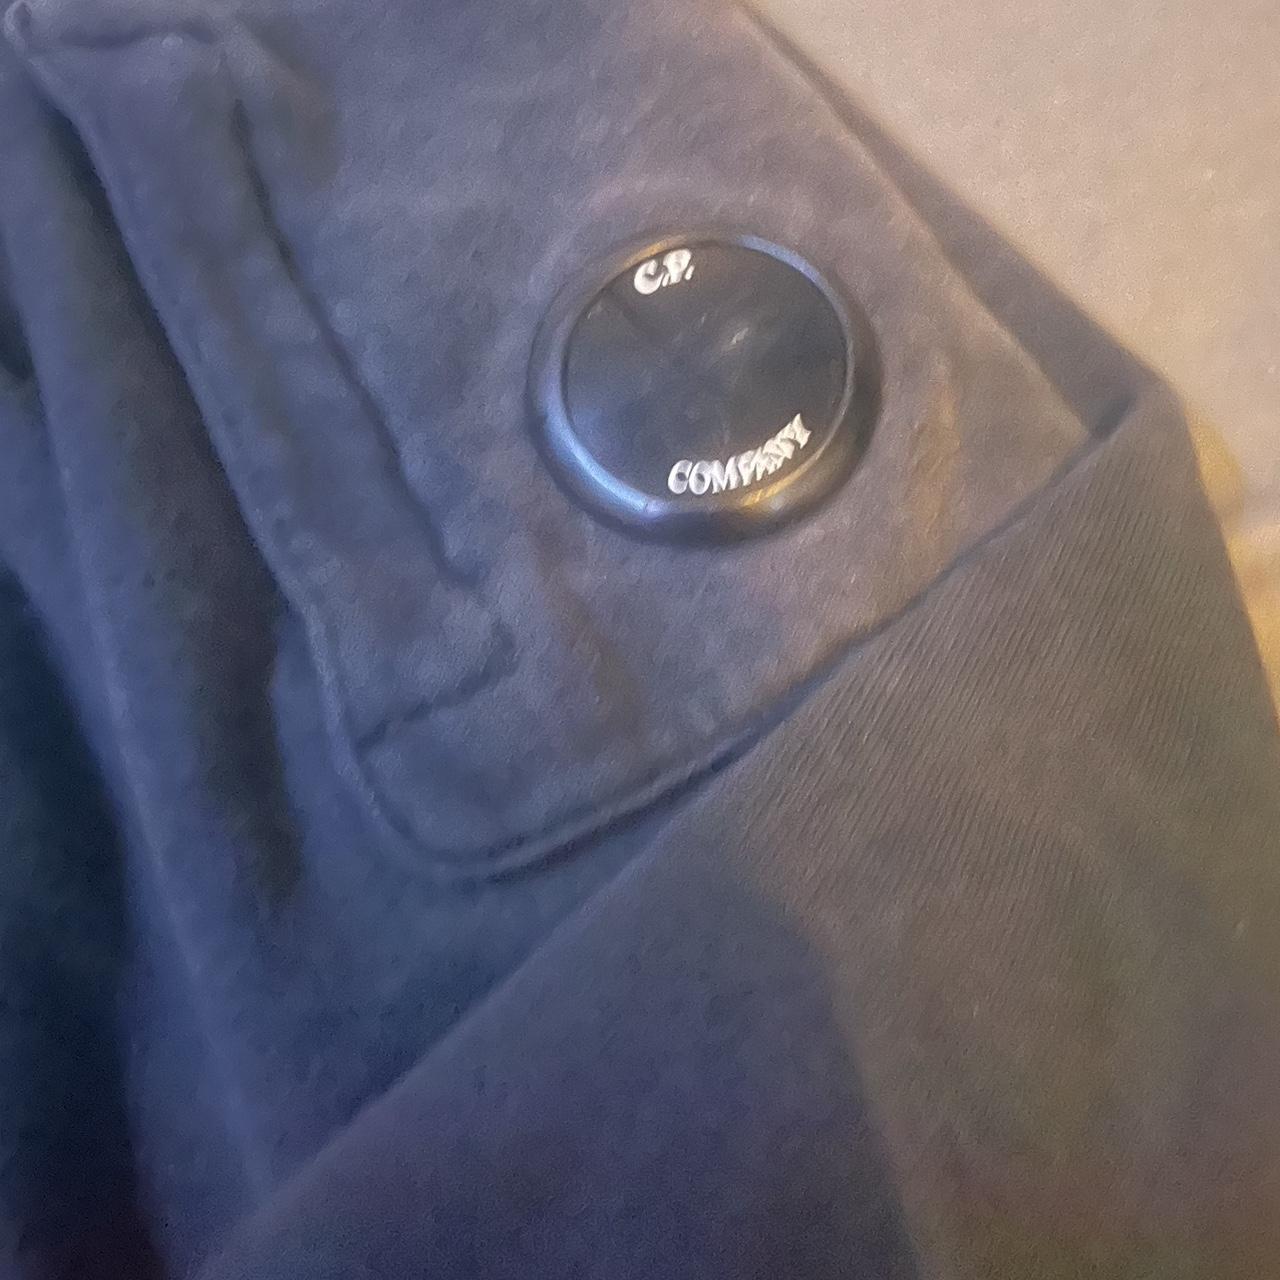 cp jumper good condition few scratches on the goggle - Depop